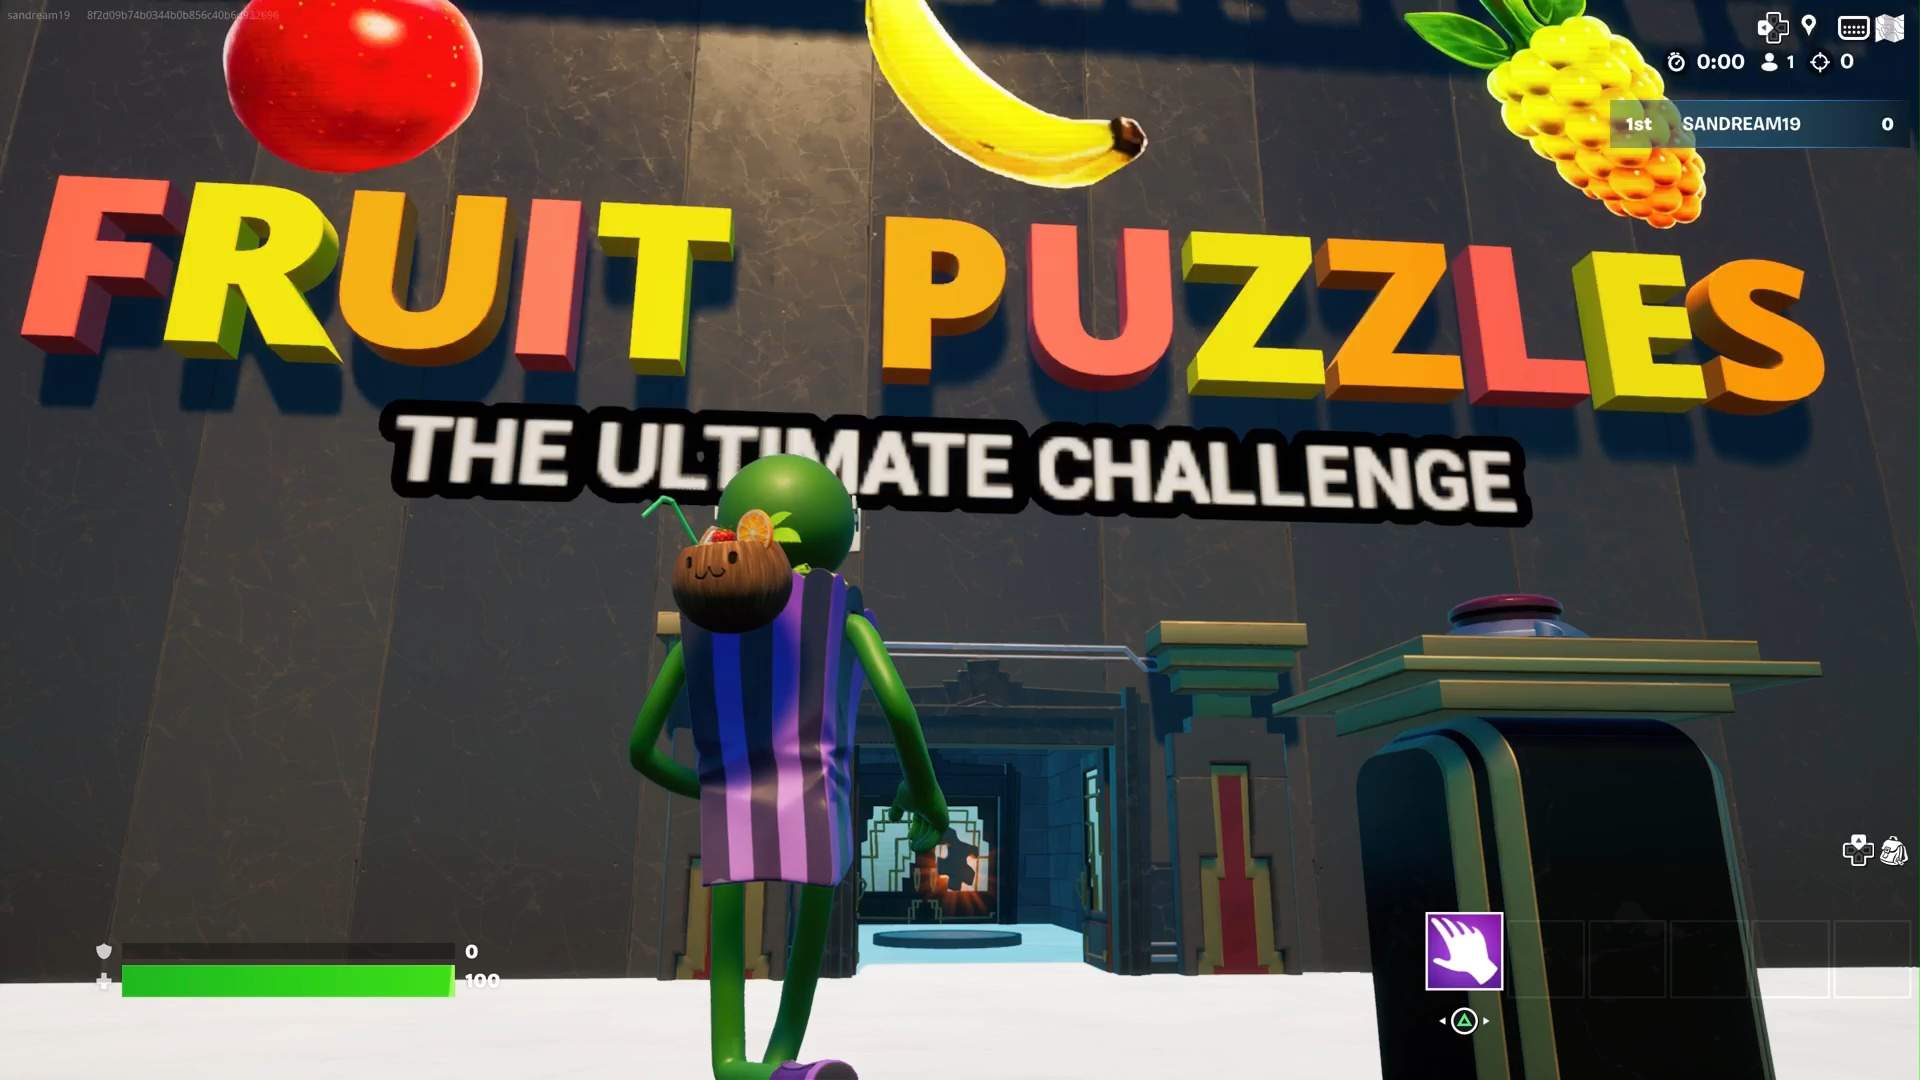 Fruit puzzles - The ultimate challenge image 2